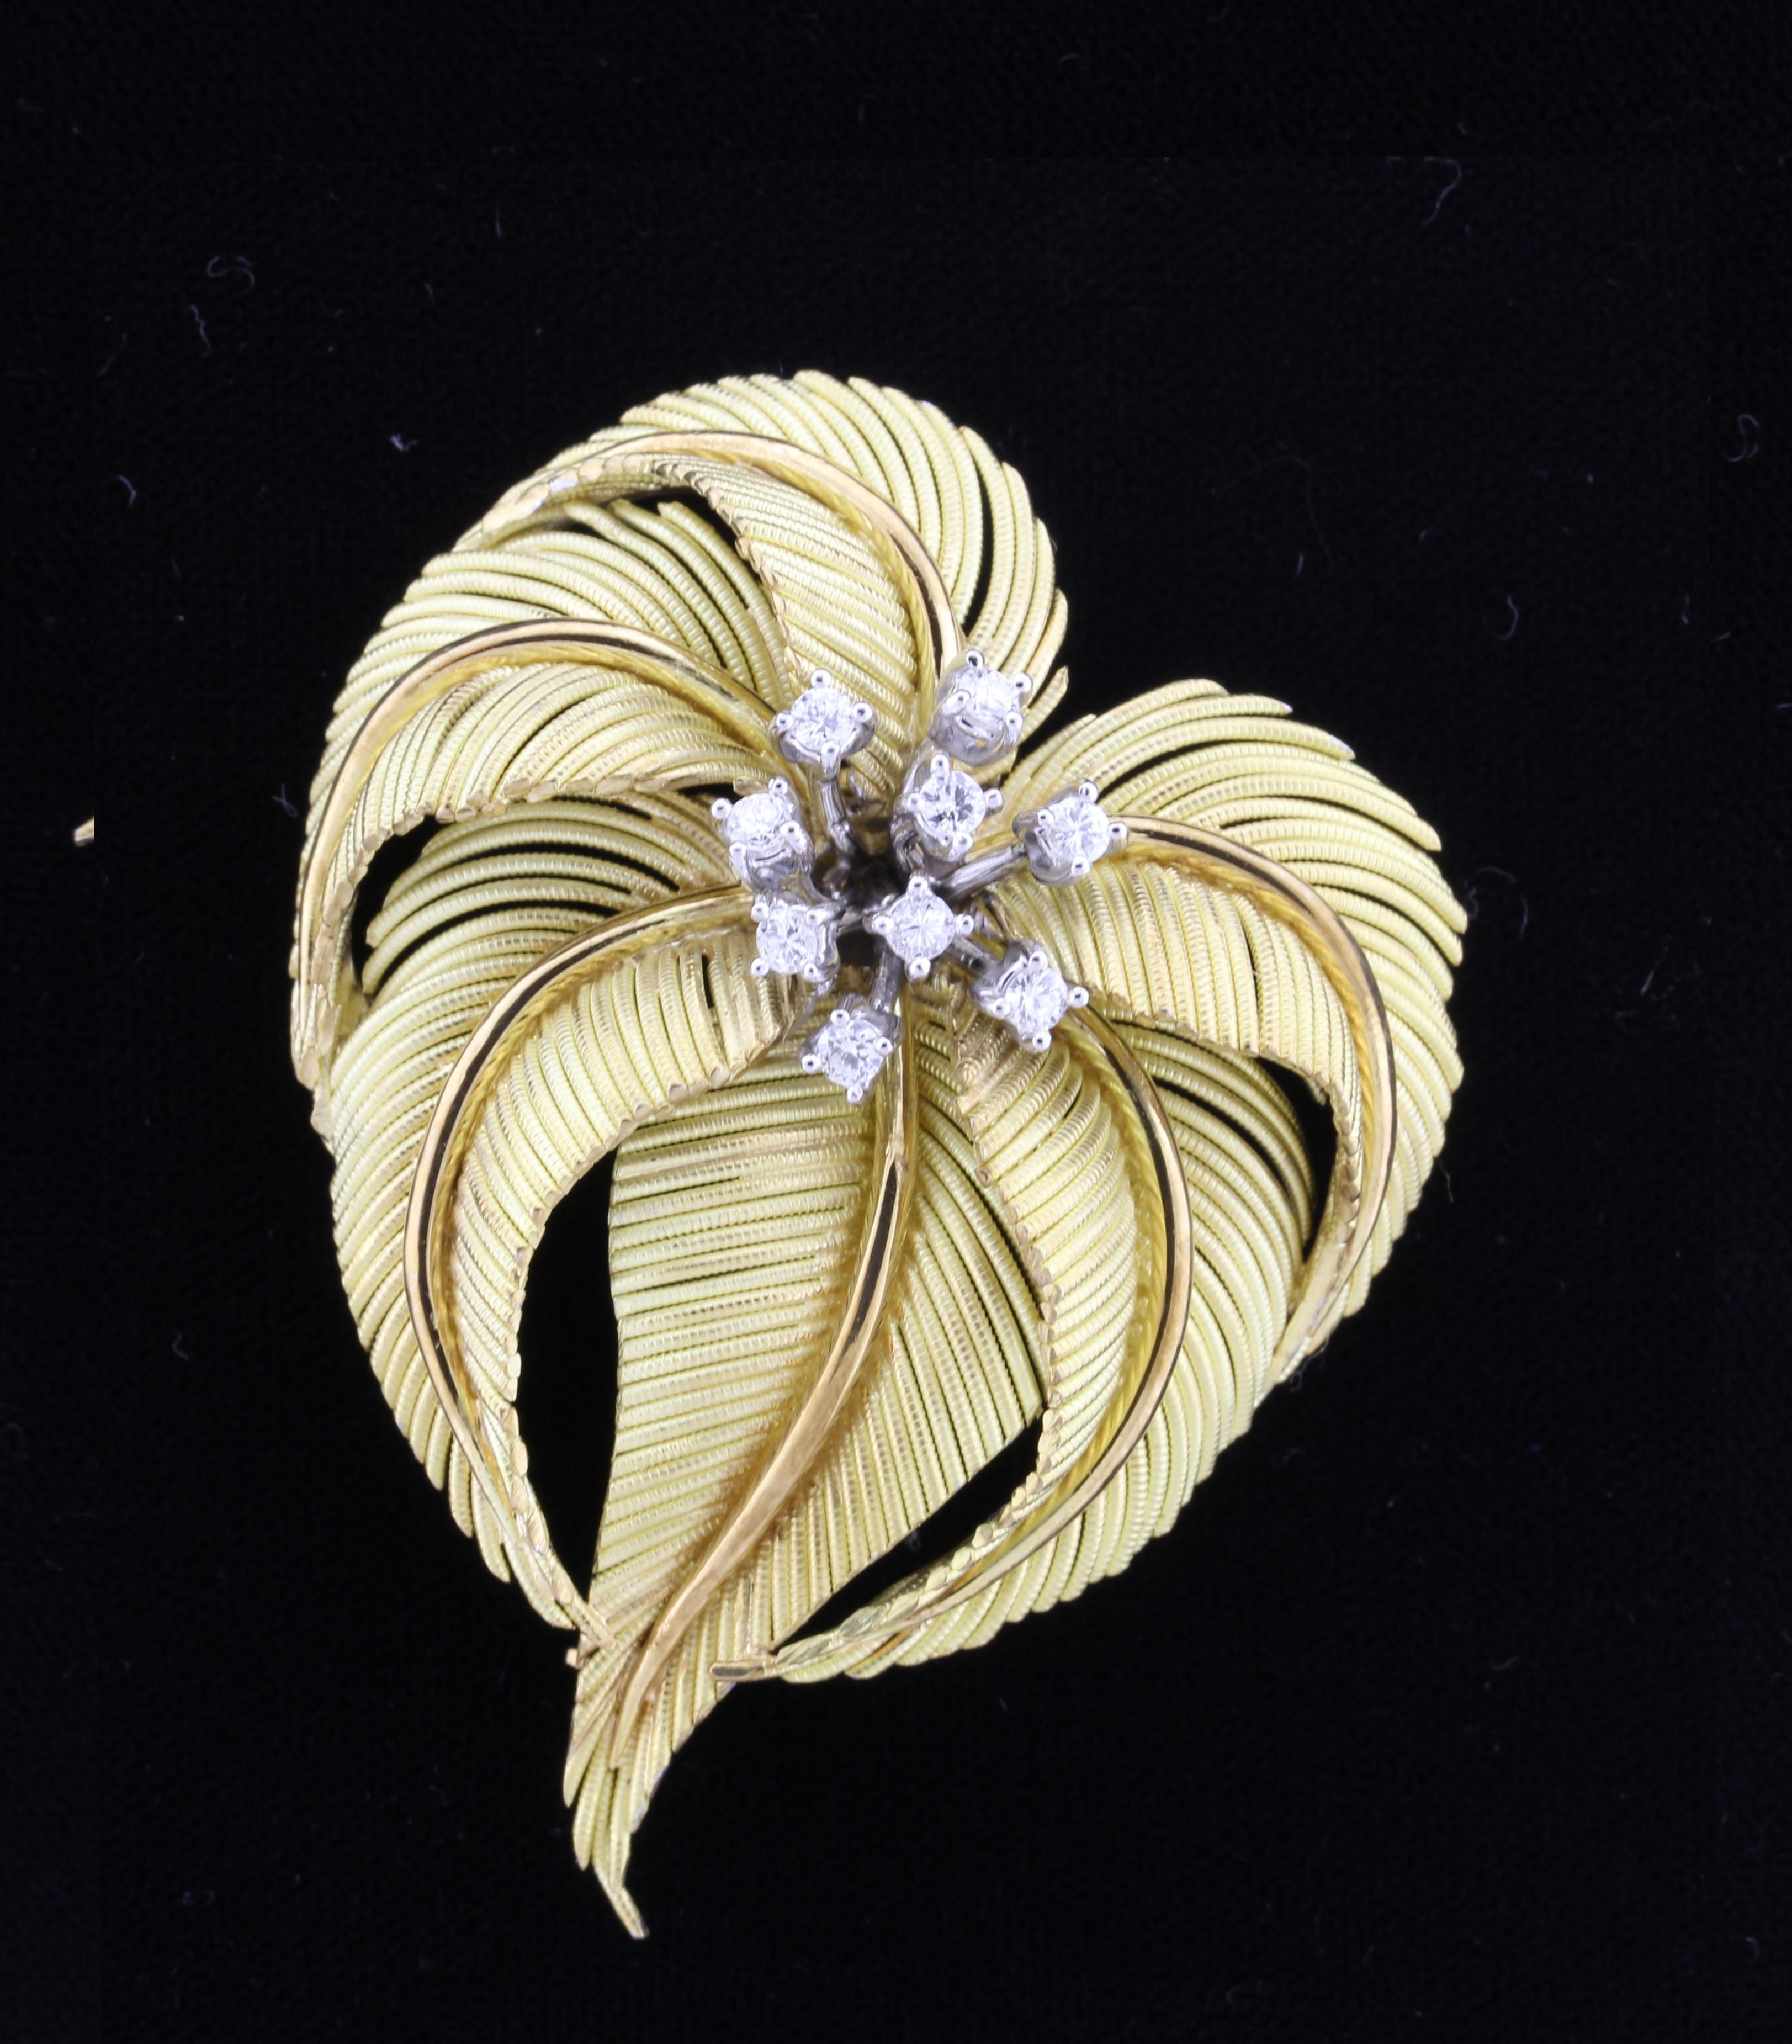 From Tiffany & Co. a series of gold palms form a dynamic diamond  gold brooch
• Designer:  Tiffany & Co.
•  18 karat gold with platinum settings
•  Circa: 1990s
•  Size: 2¼ by 1¾
•  9 Diamond: weigh .45 carats
•  Packaging: Tiffany box
• Condition: